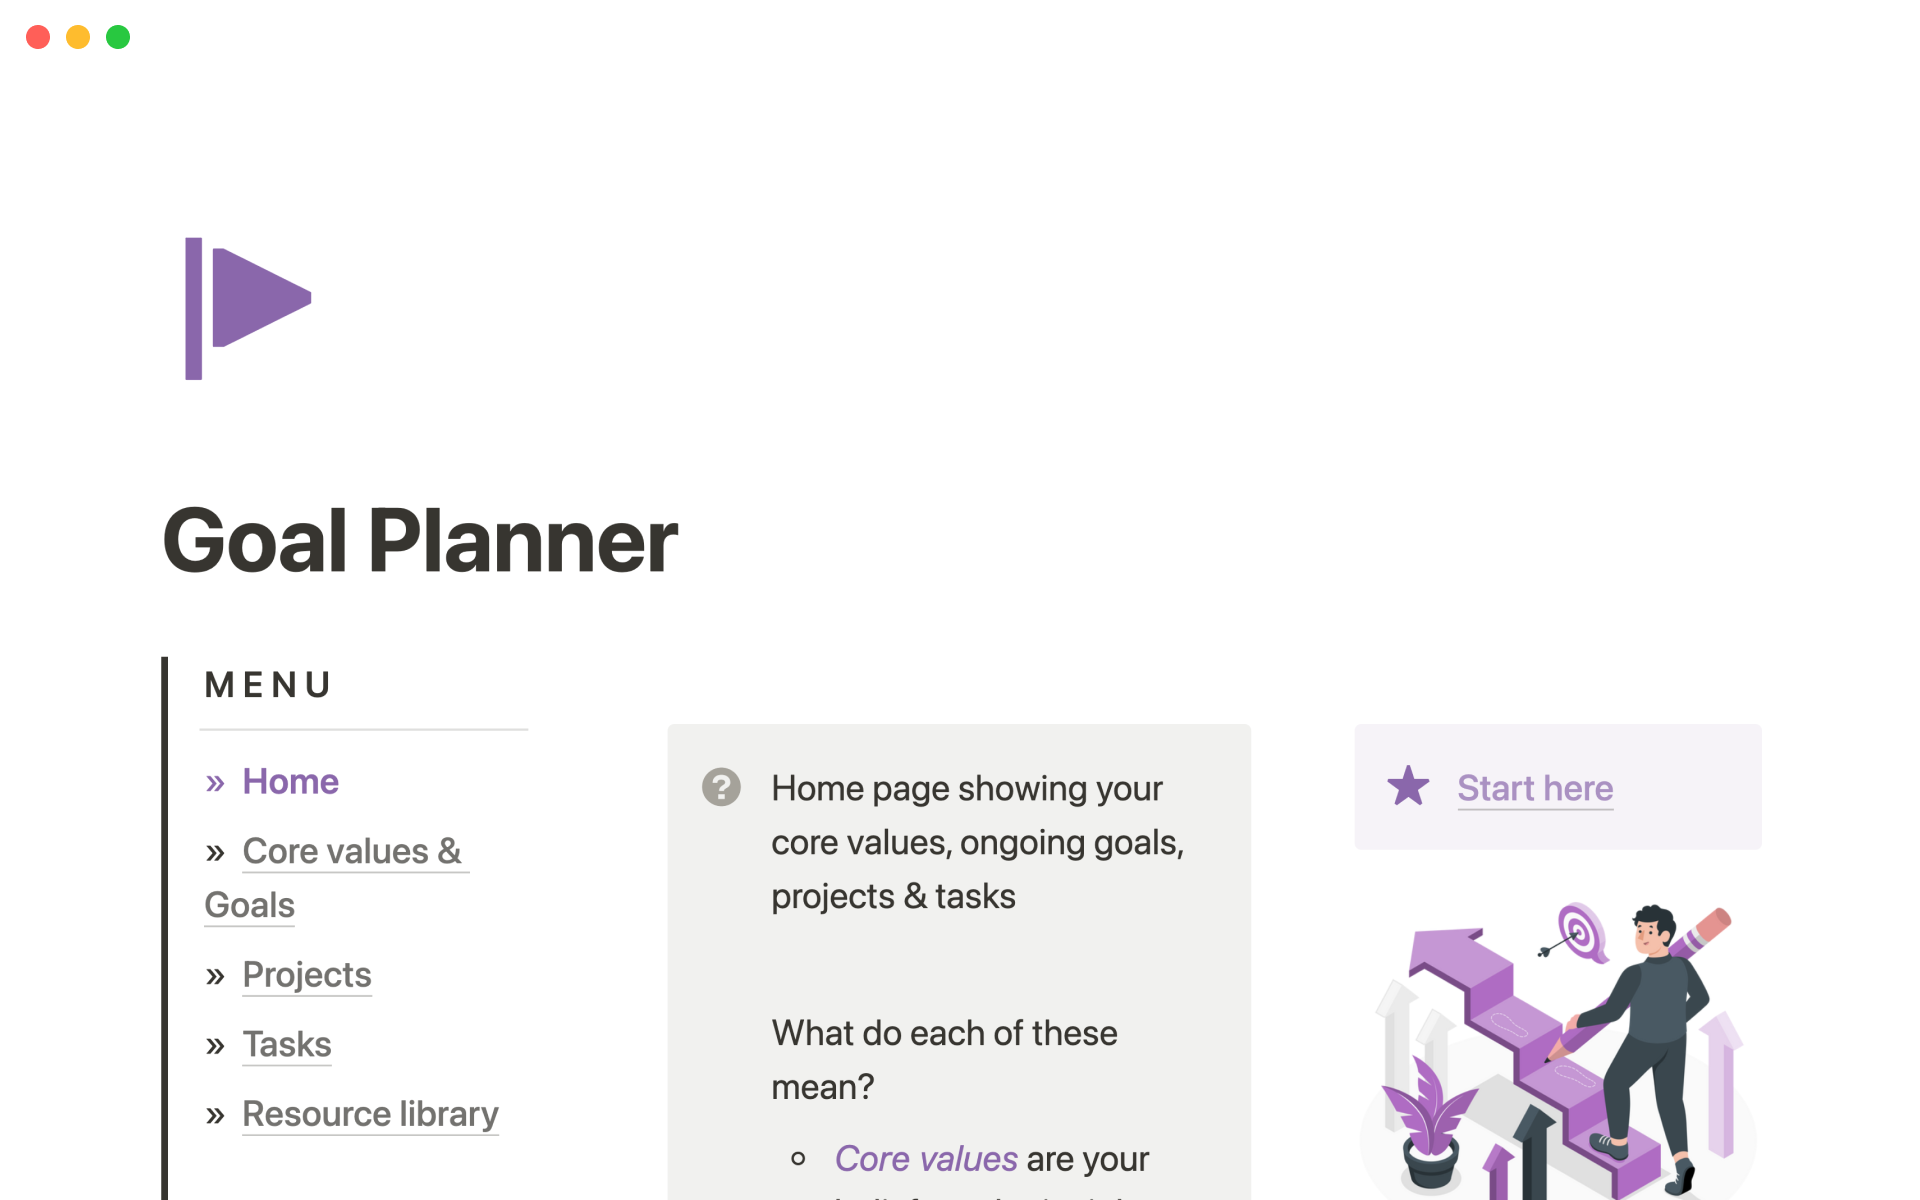 Manage your goals by tracking the smaller projects & actionable tasks.